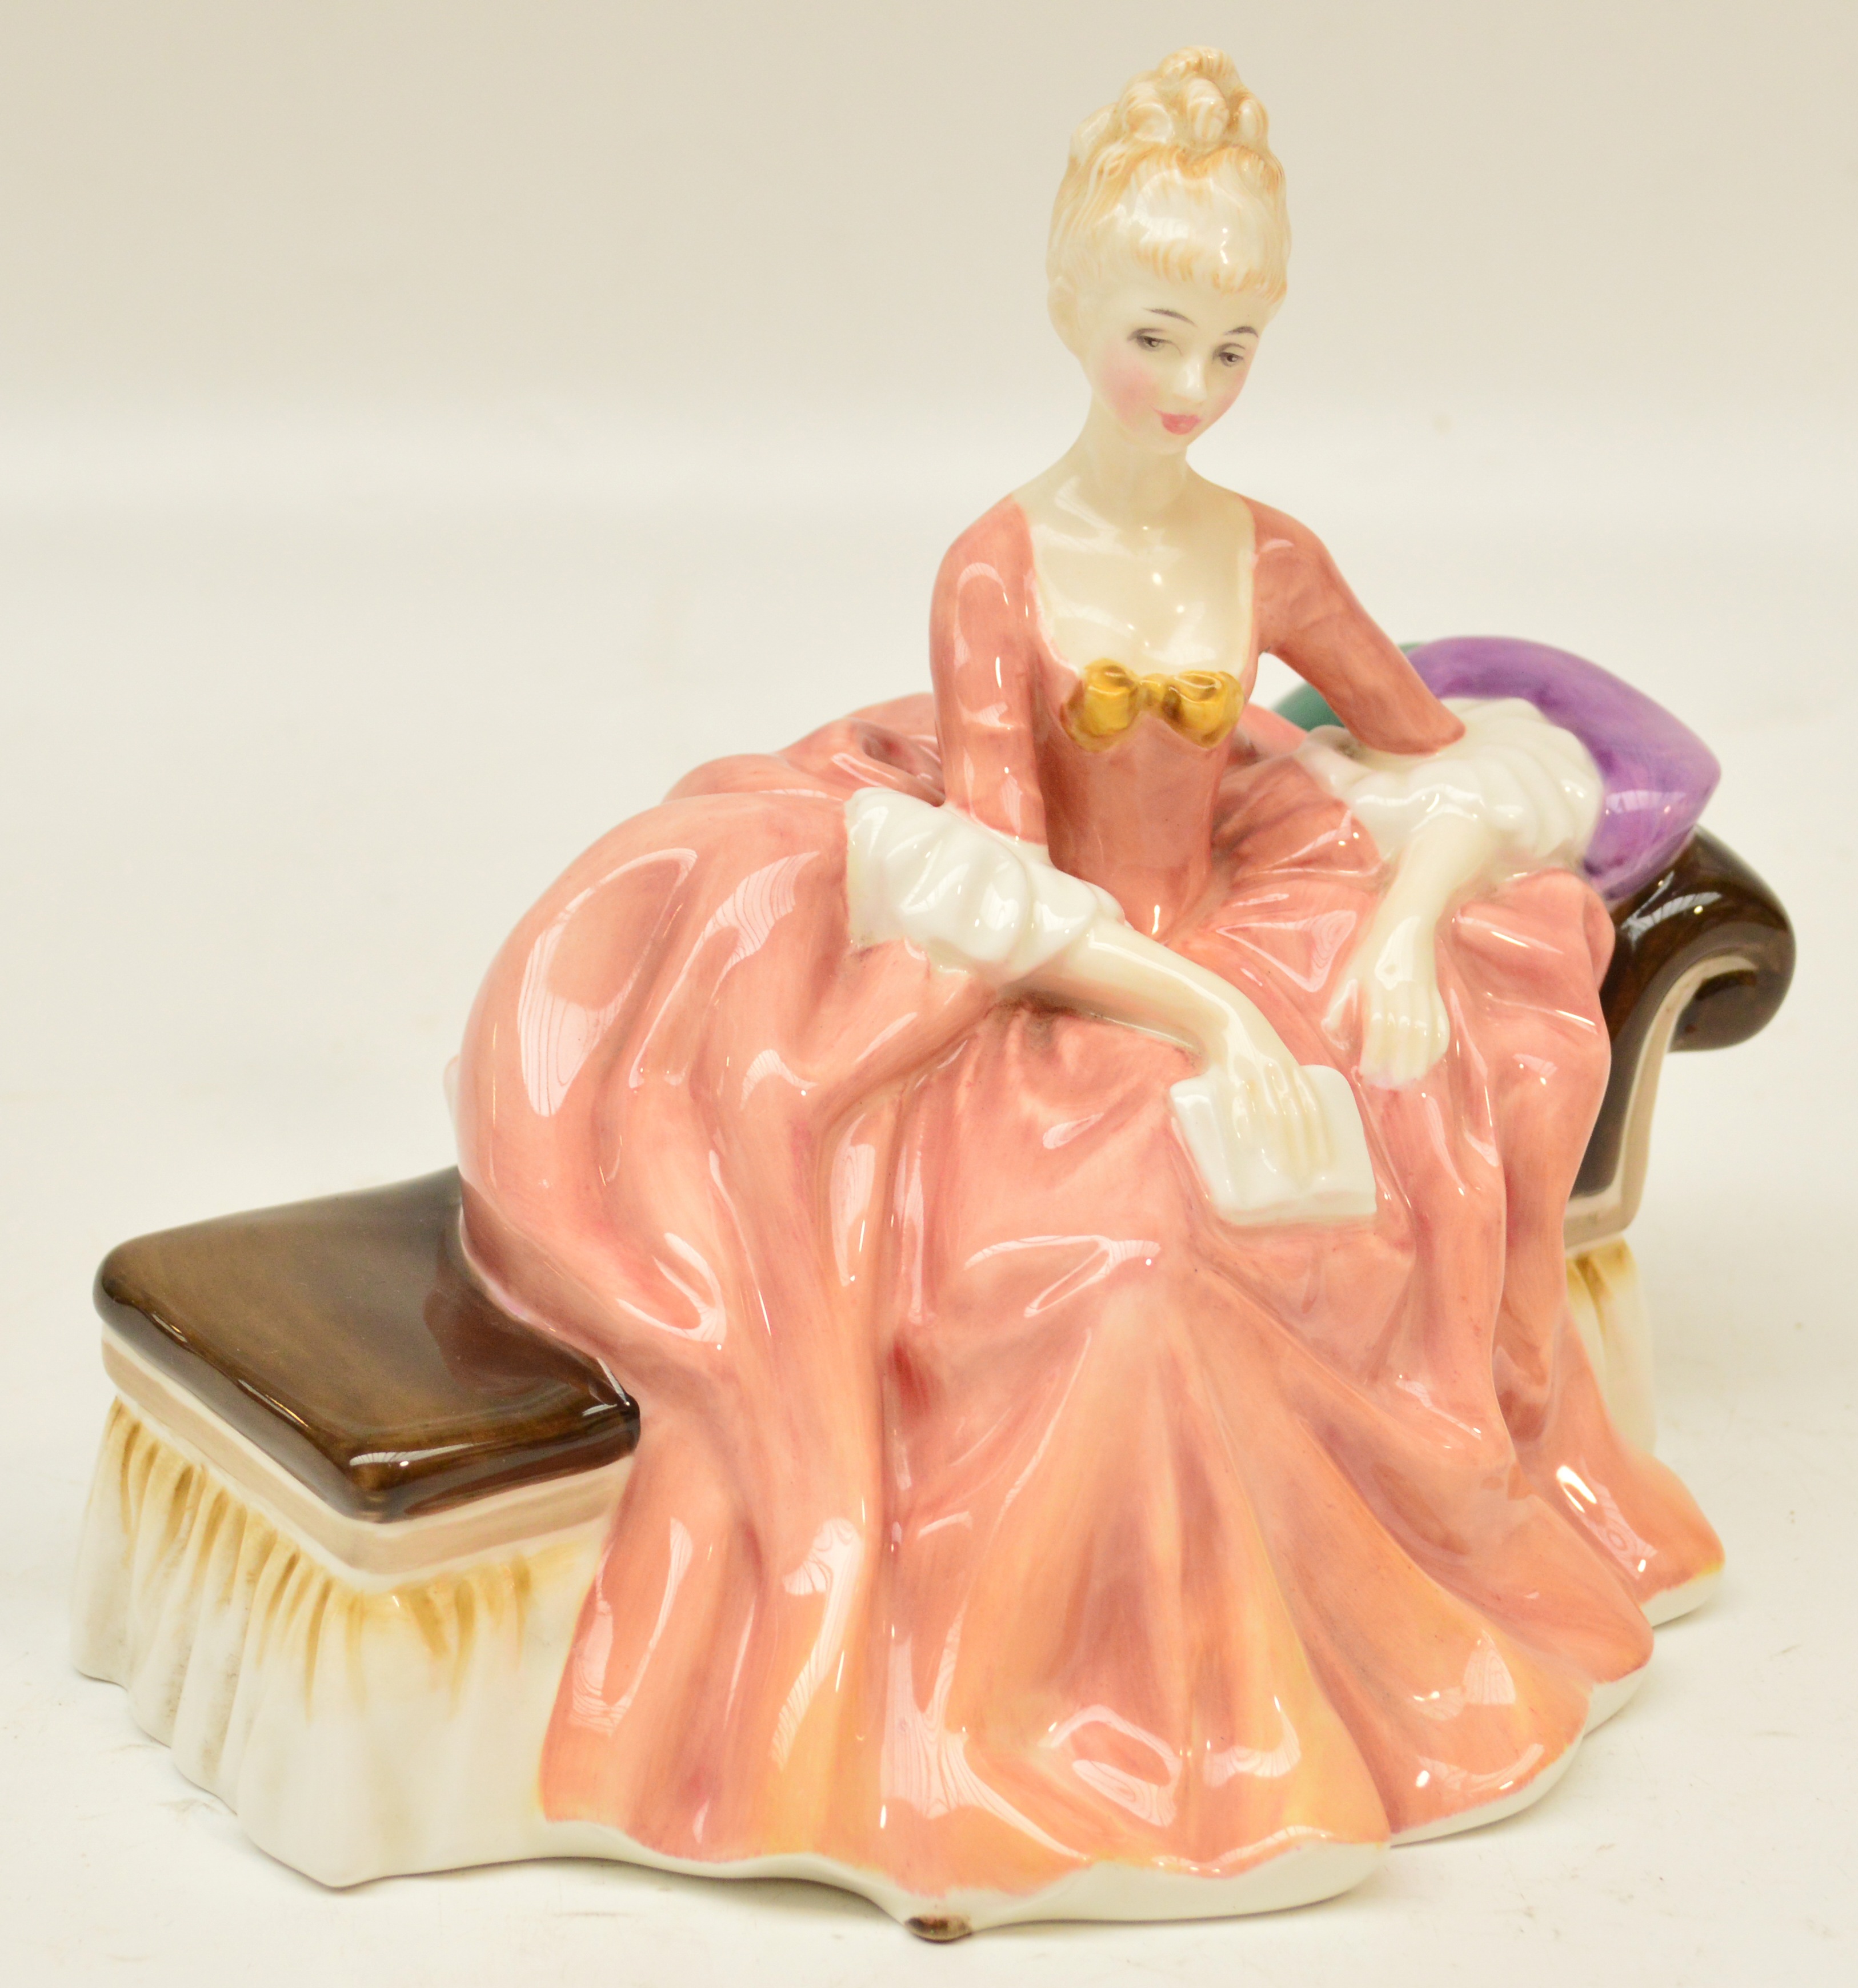 A Royal Doulton figurine HN2306 "Reverie". CONDITION REPORT: Appears good with no obvious signs of